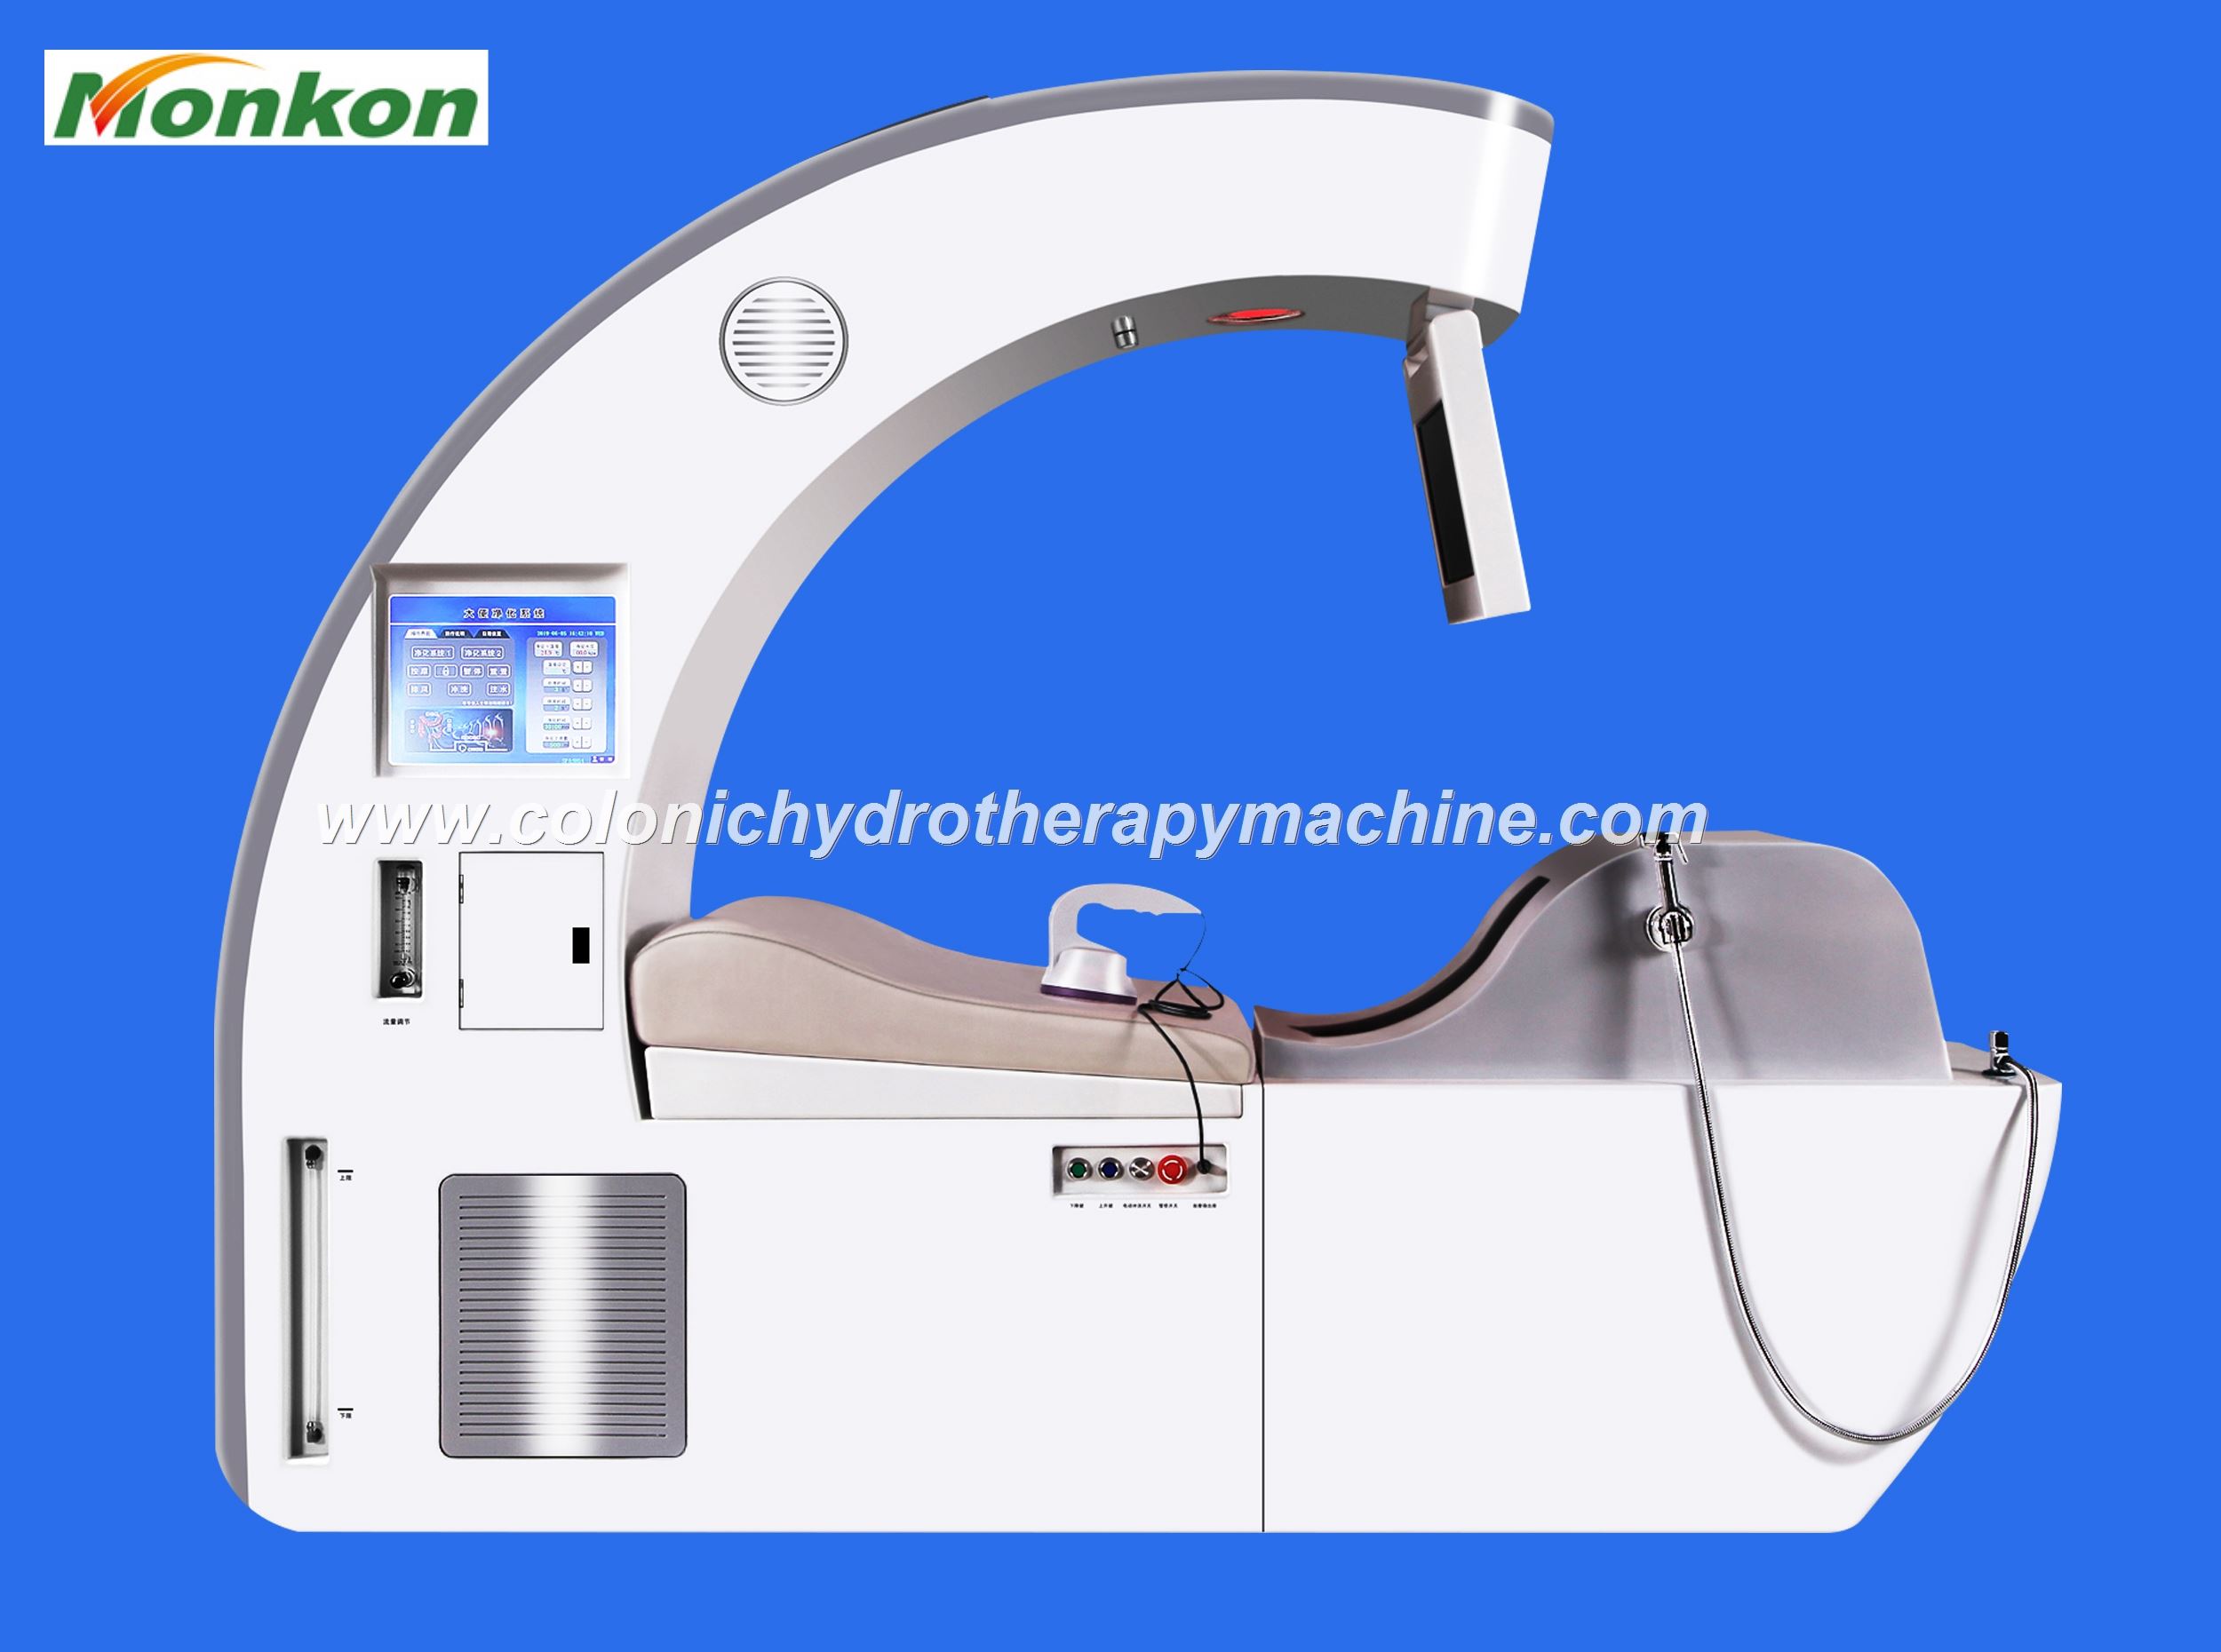 The Best Colon Hydrotherapy Machine